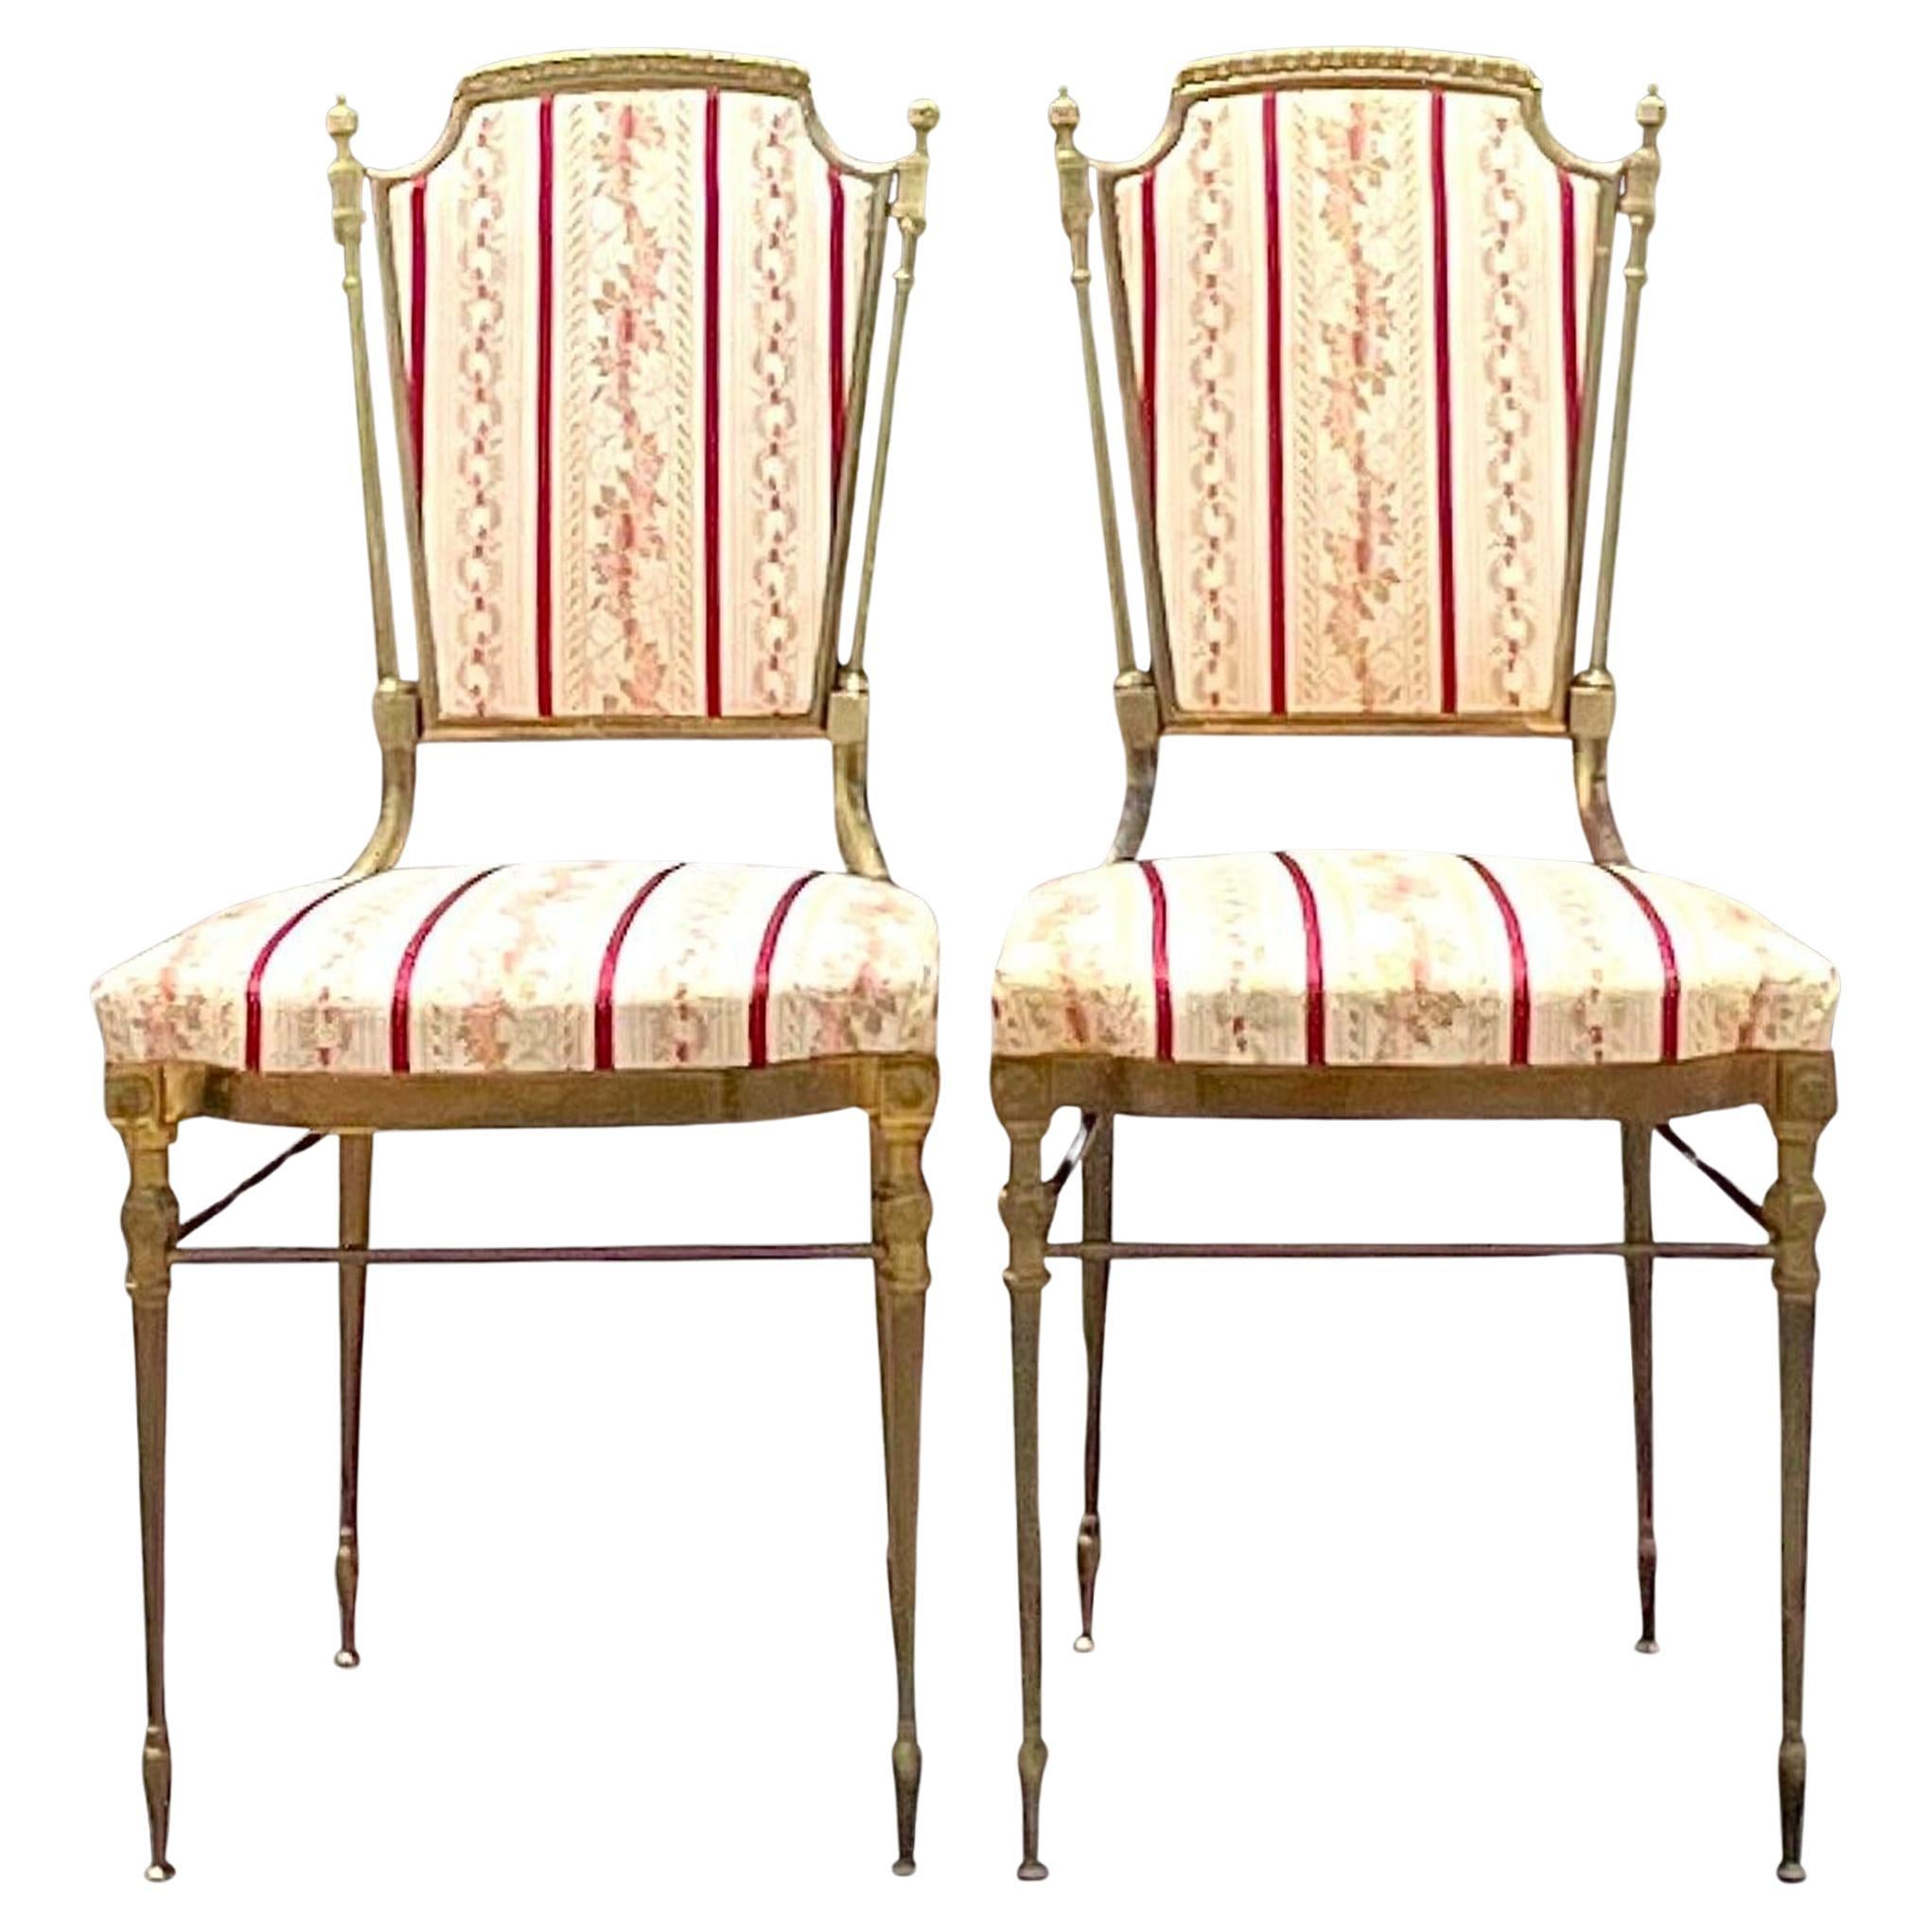 Vintage Italian Brass Charvari Chairs - a Pair For Sale